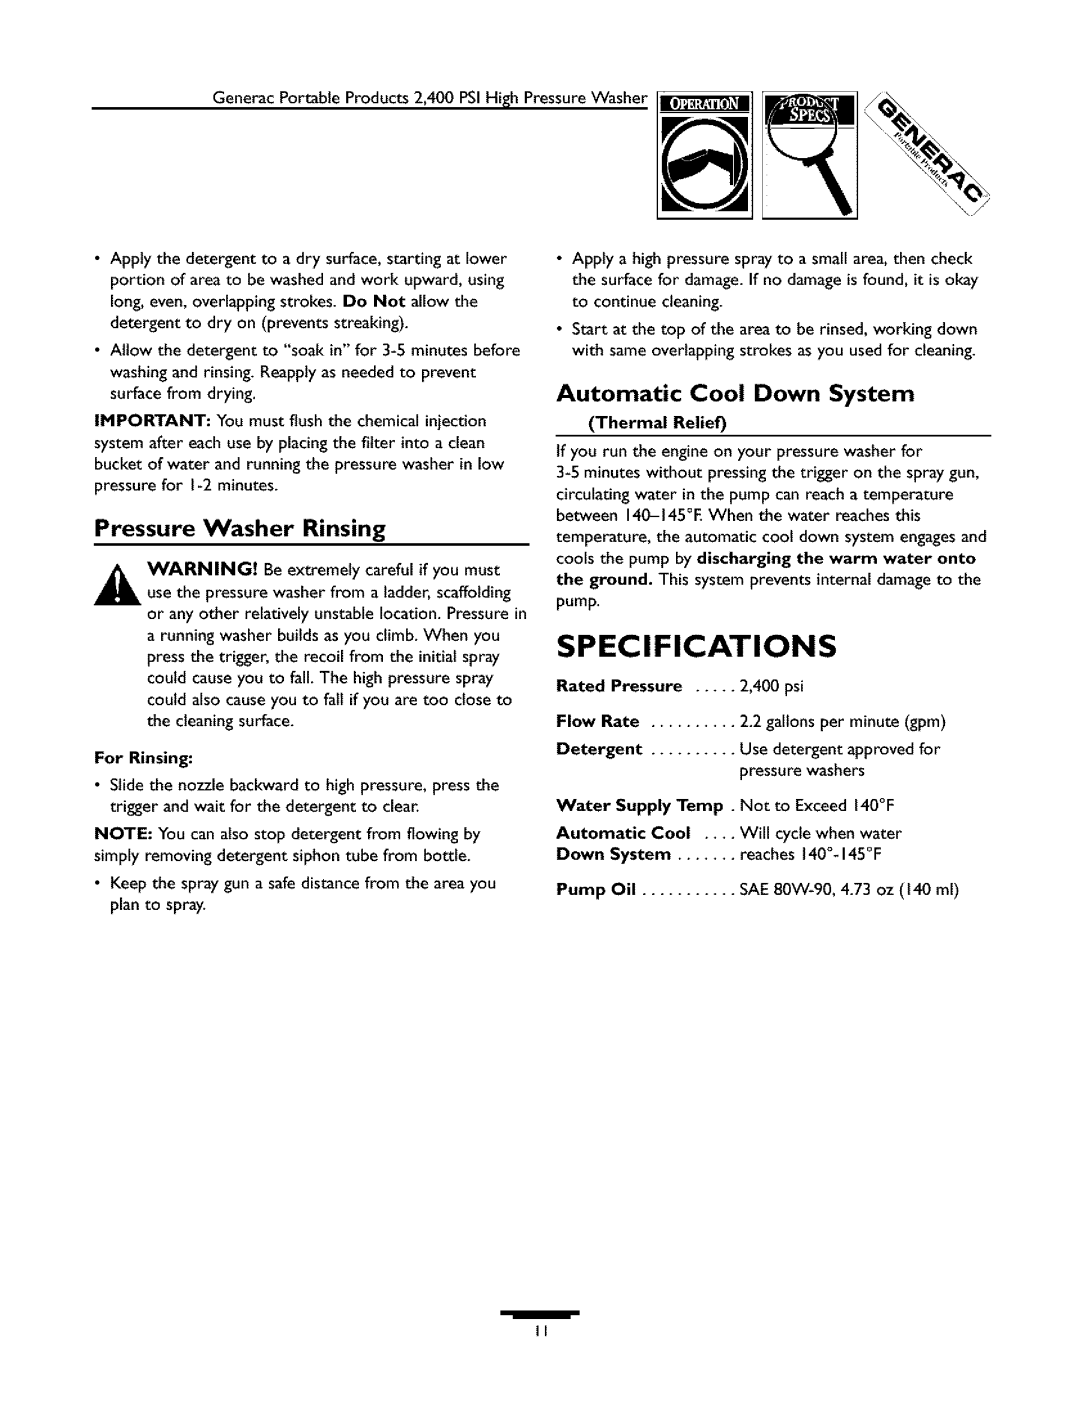 Generac 1537-0 owner manual Specifications, Pressure Washer Rinsing, Automatic Cool Down System 